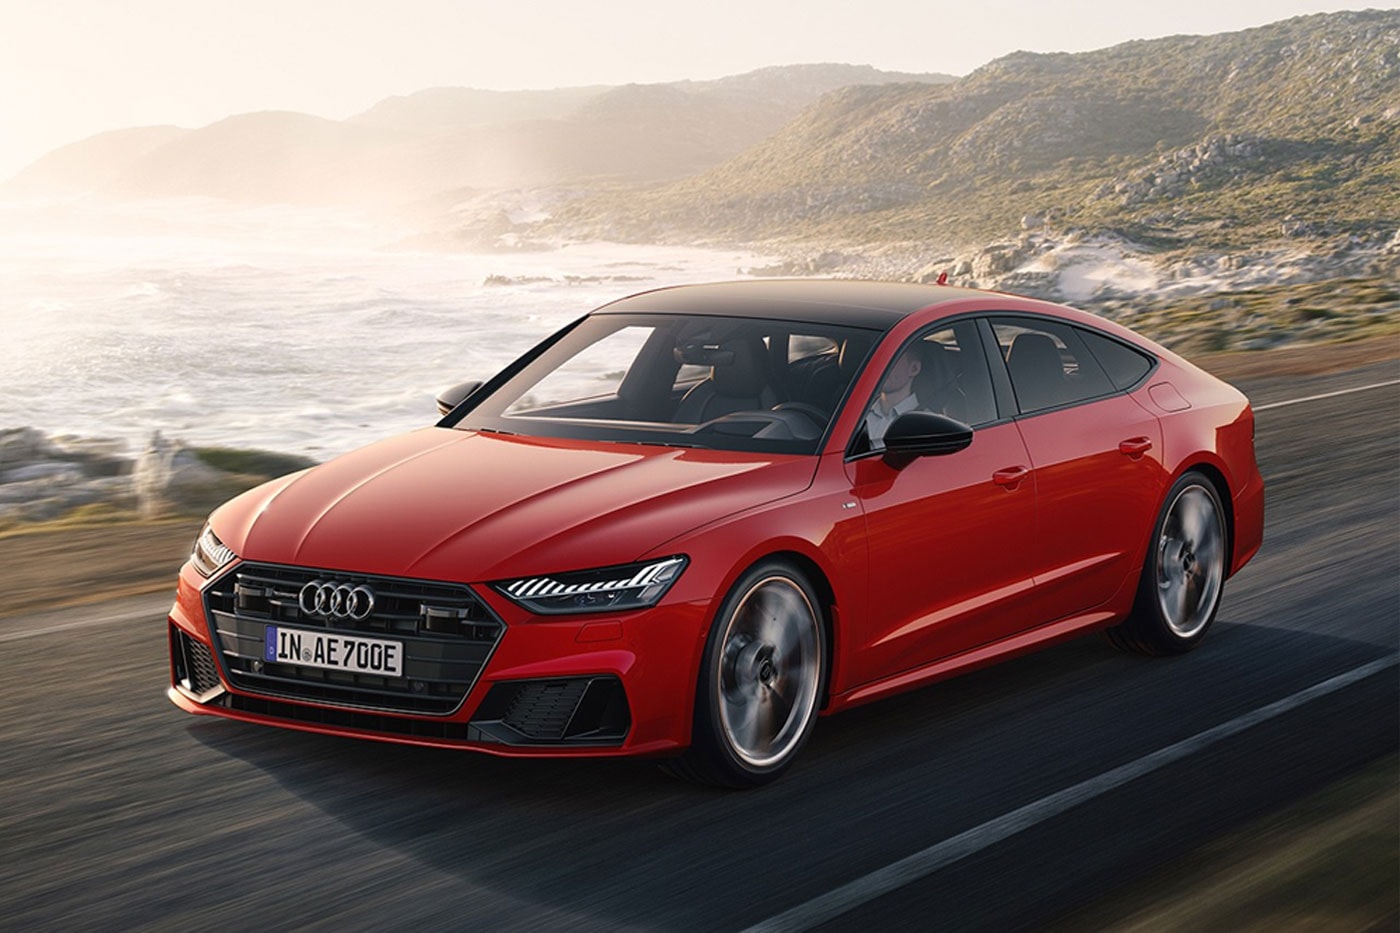 Audi Reveals Its New V6 Diesel Models Will Run On Renewable Fuel hydrotreated vegetable oil carbon dioxide hbo cars environmental electrification 